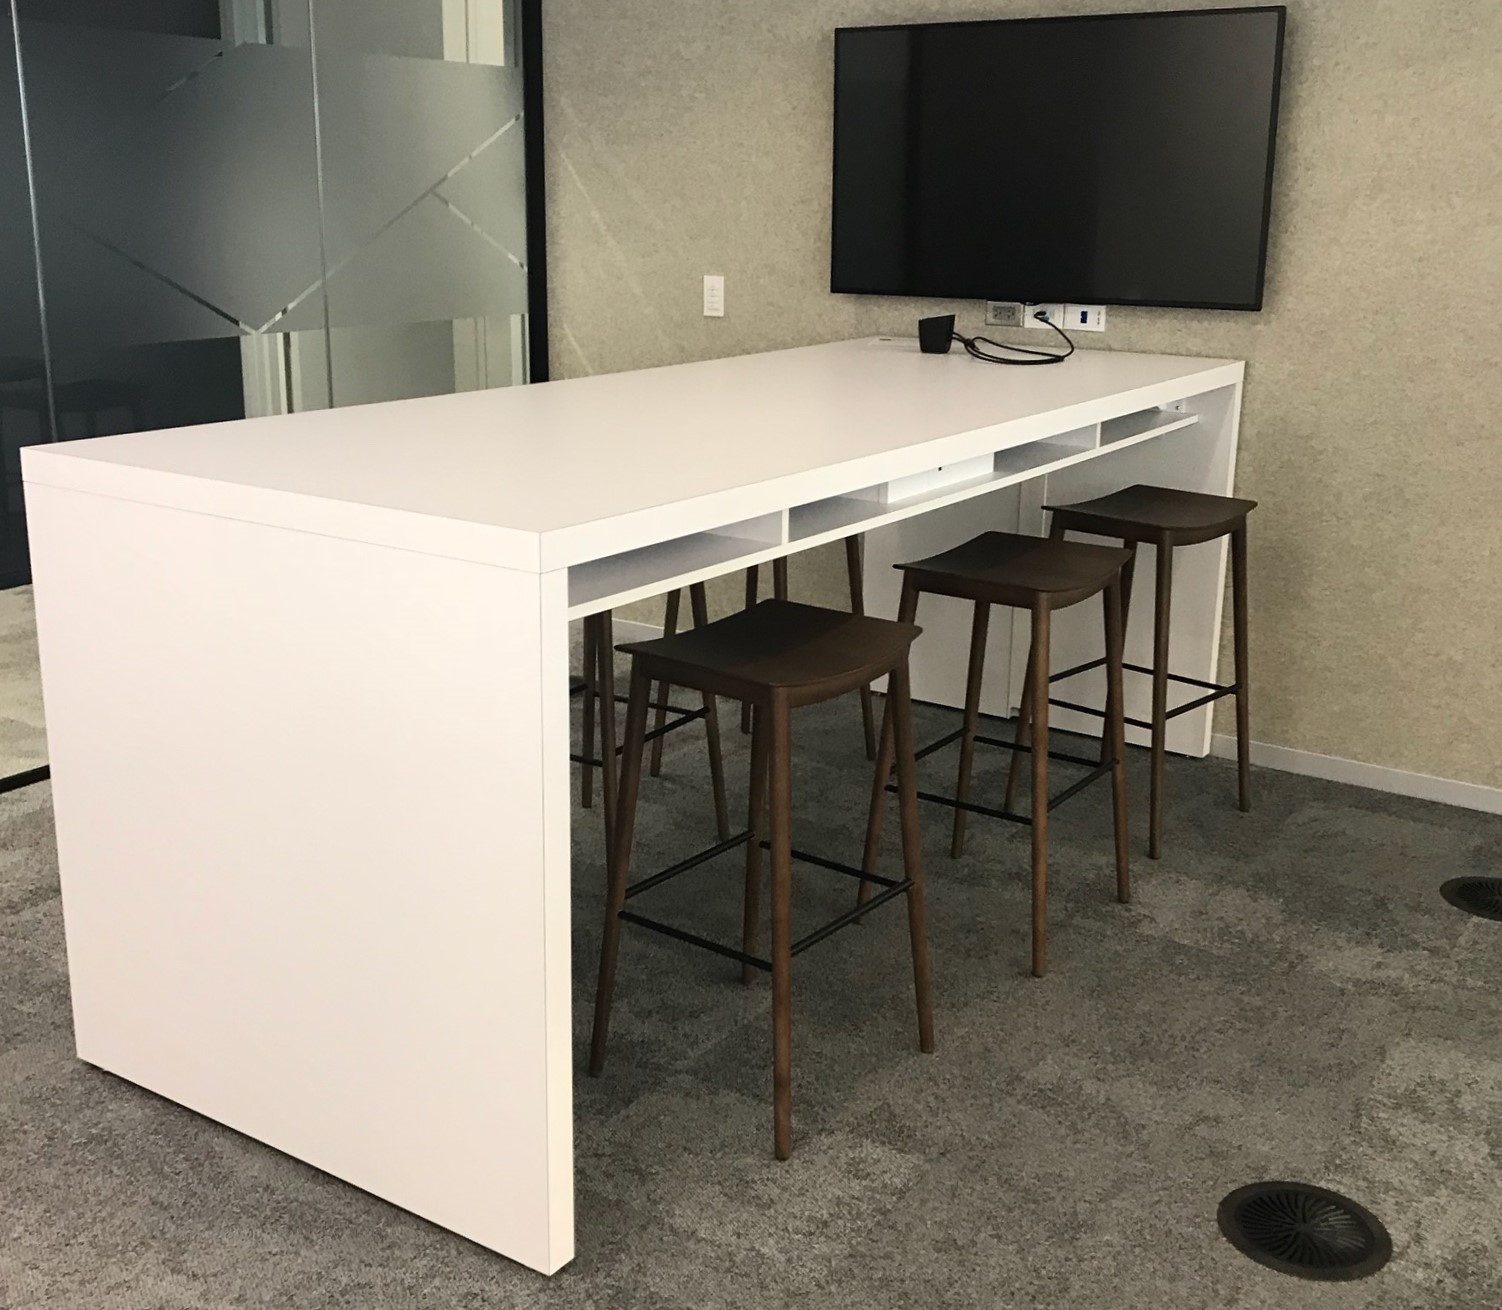 Hi5 Union 2.0 Table in office white finish